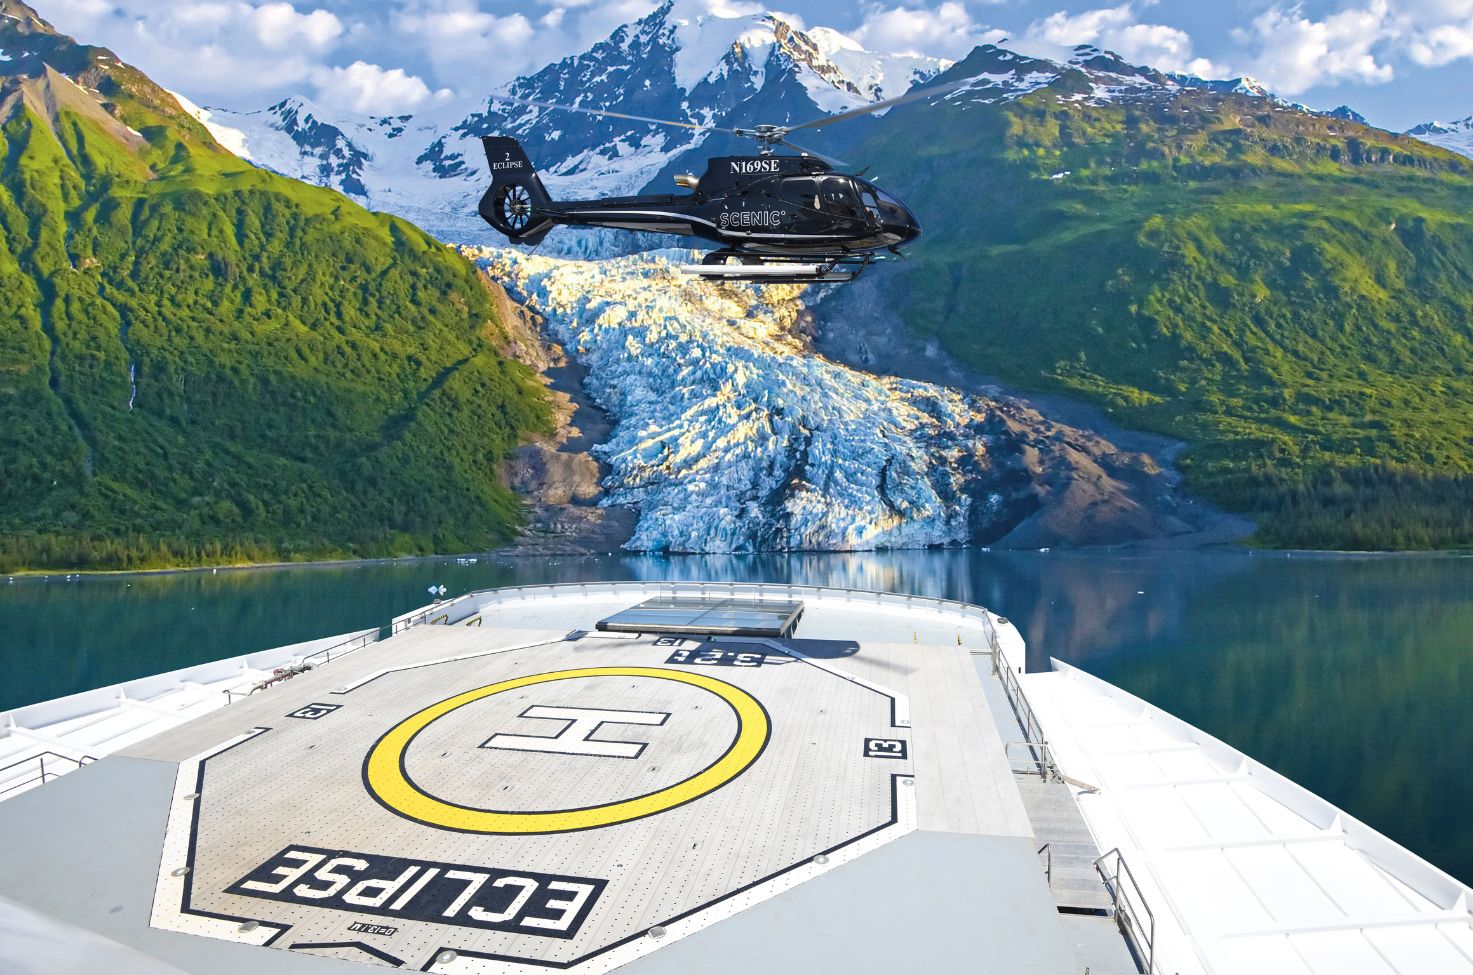 helicopter launching from a helipad on the back of a cruise ship in front of a glacier